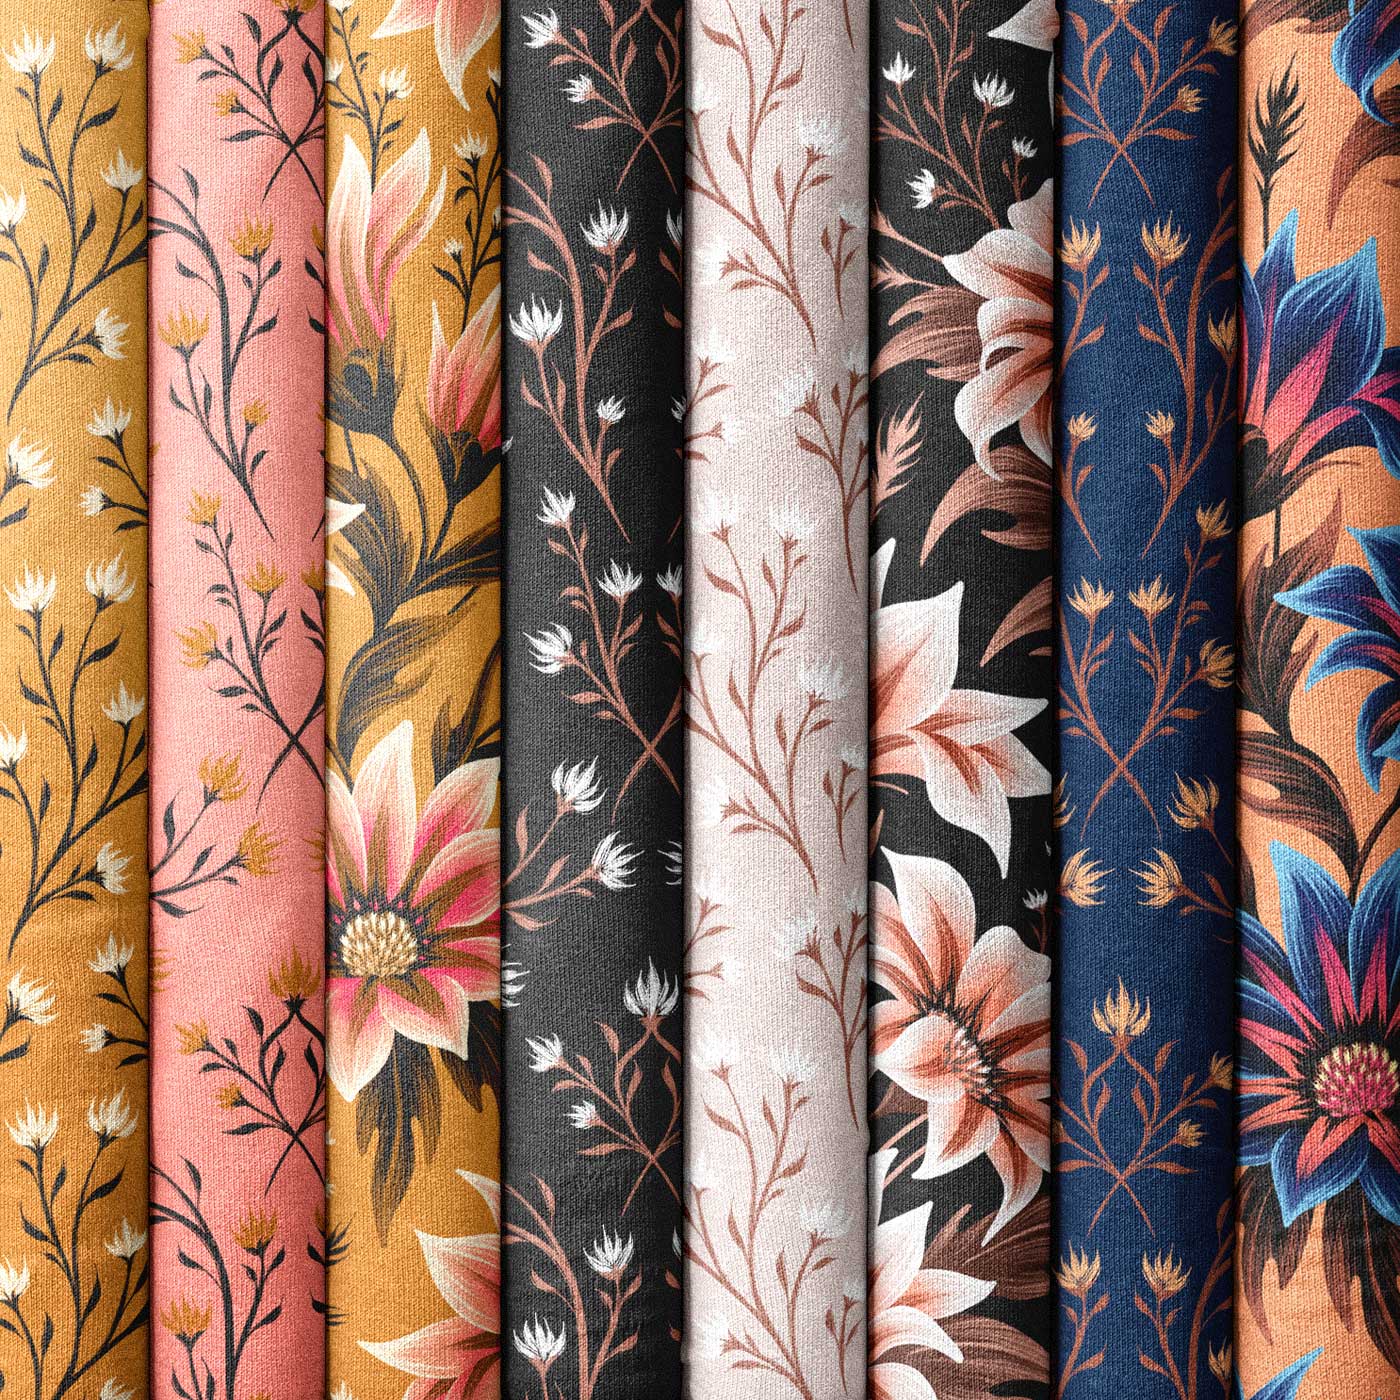 Coordinating collection of fabrics with gazania flowers by Andrea Muller